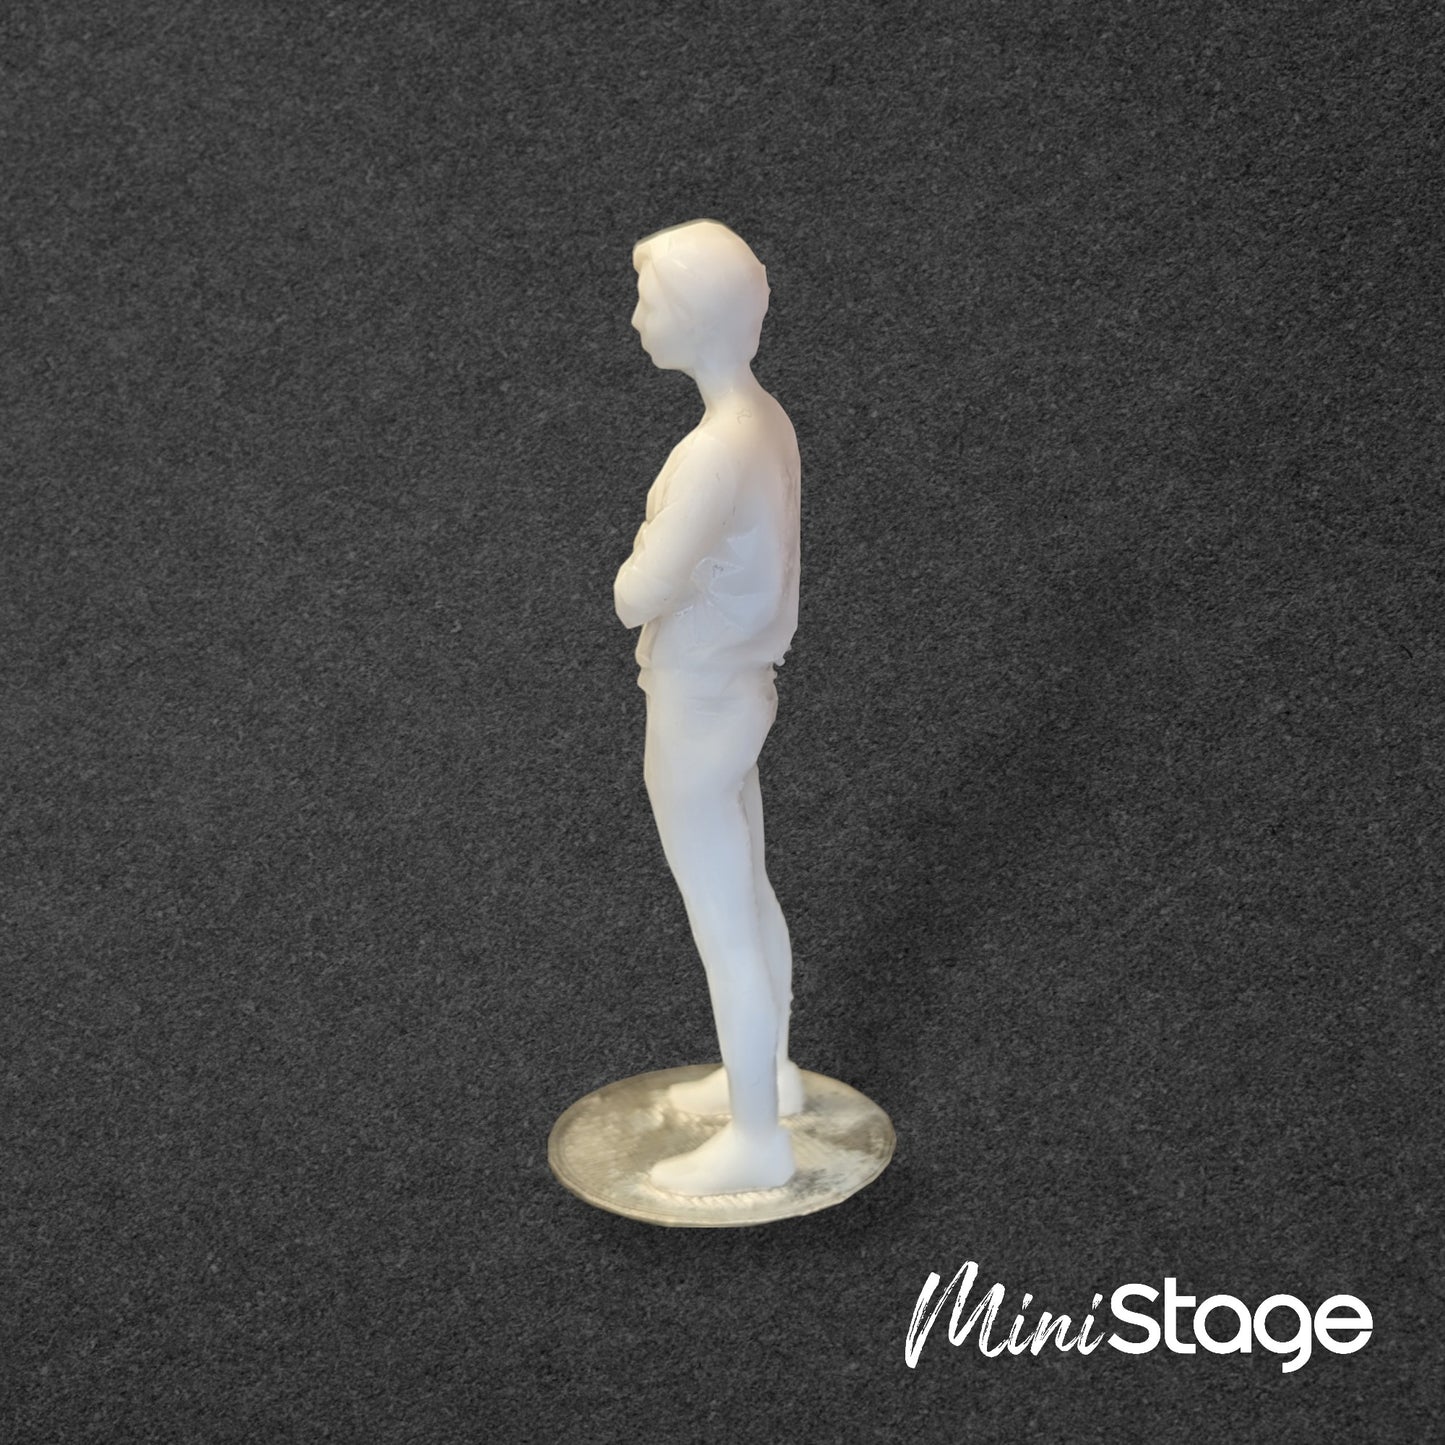 Lily - Scale Modelbox Unpainted Figure of Woman Standing with Arms Folded